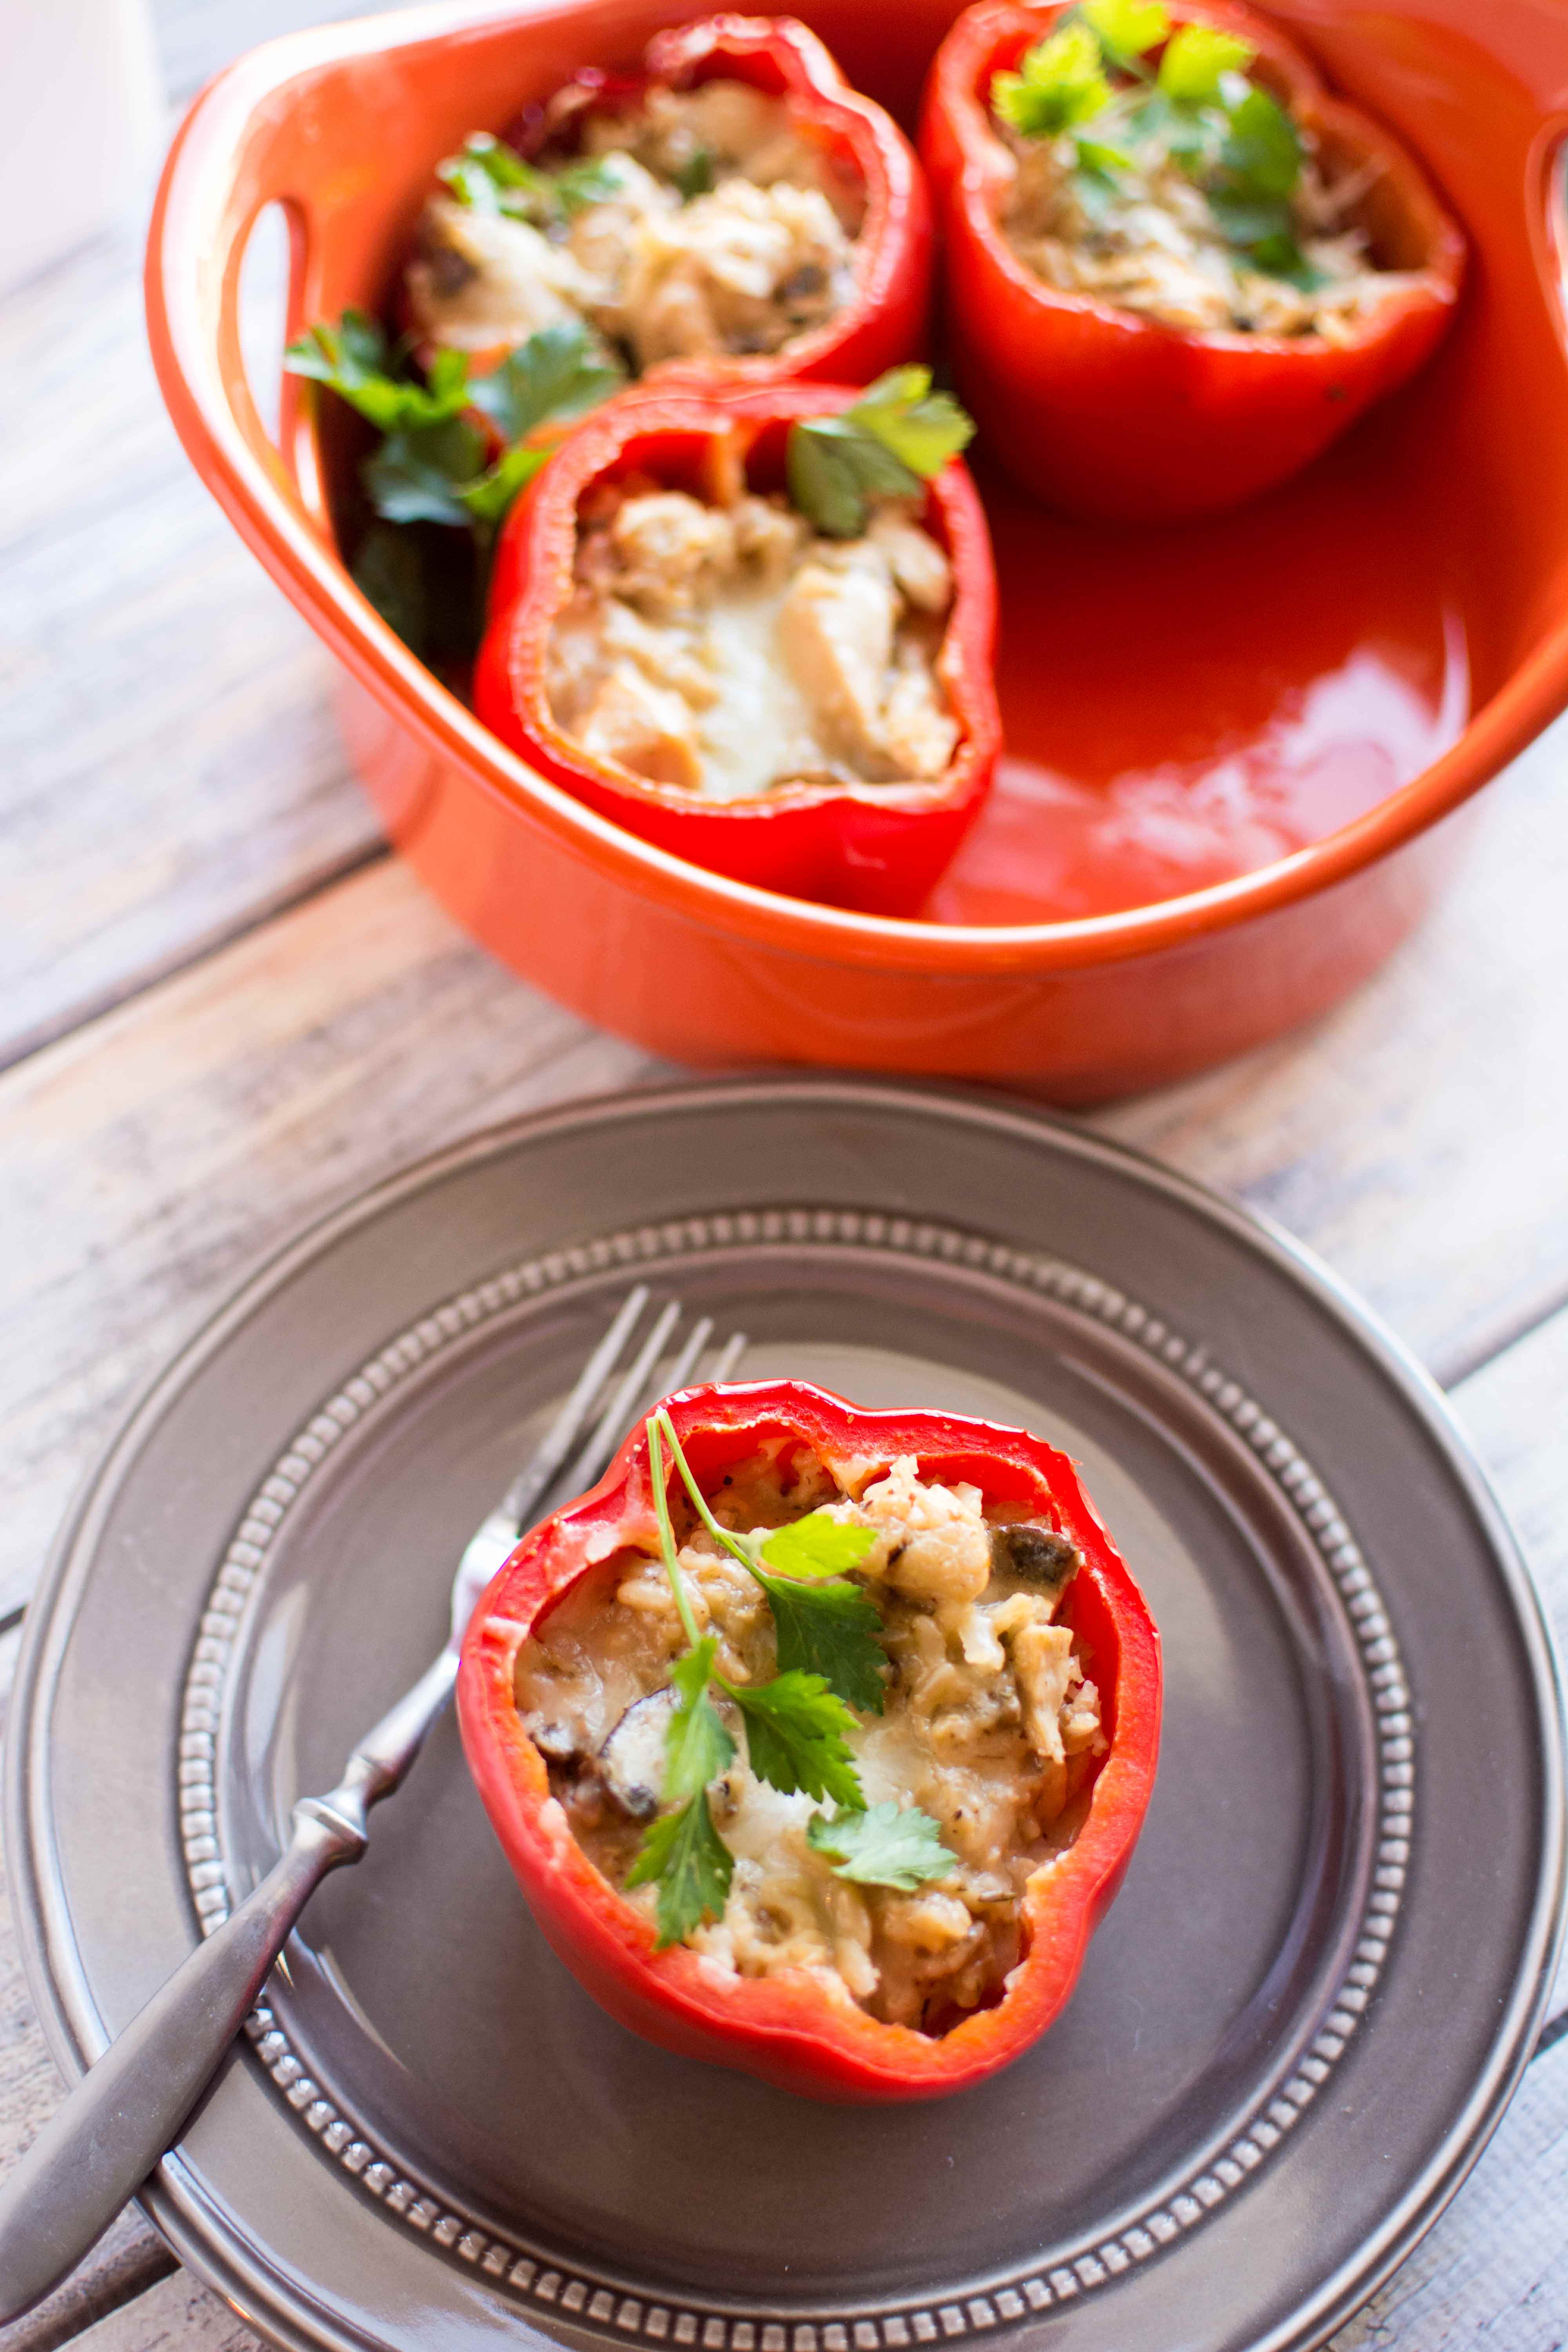 gray plate with one stuffed pepper with fork on side, with three stuffed red peppers in red serving dish in background